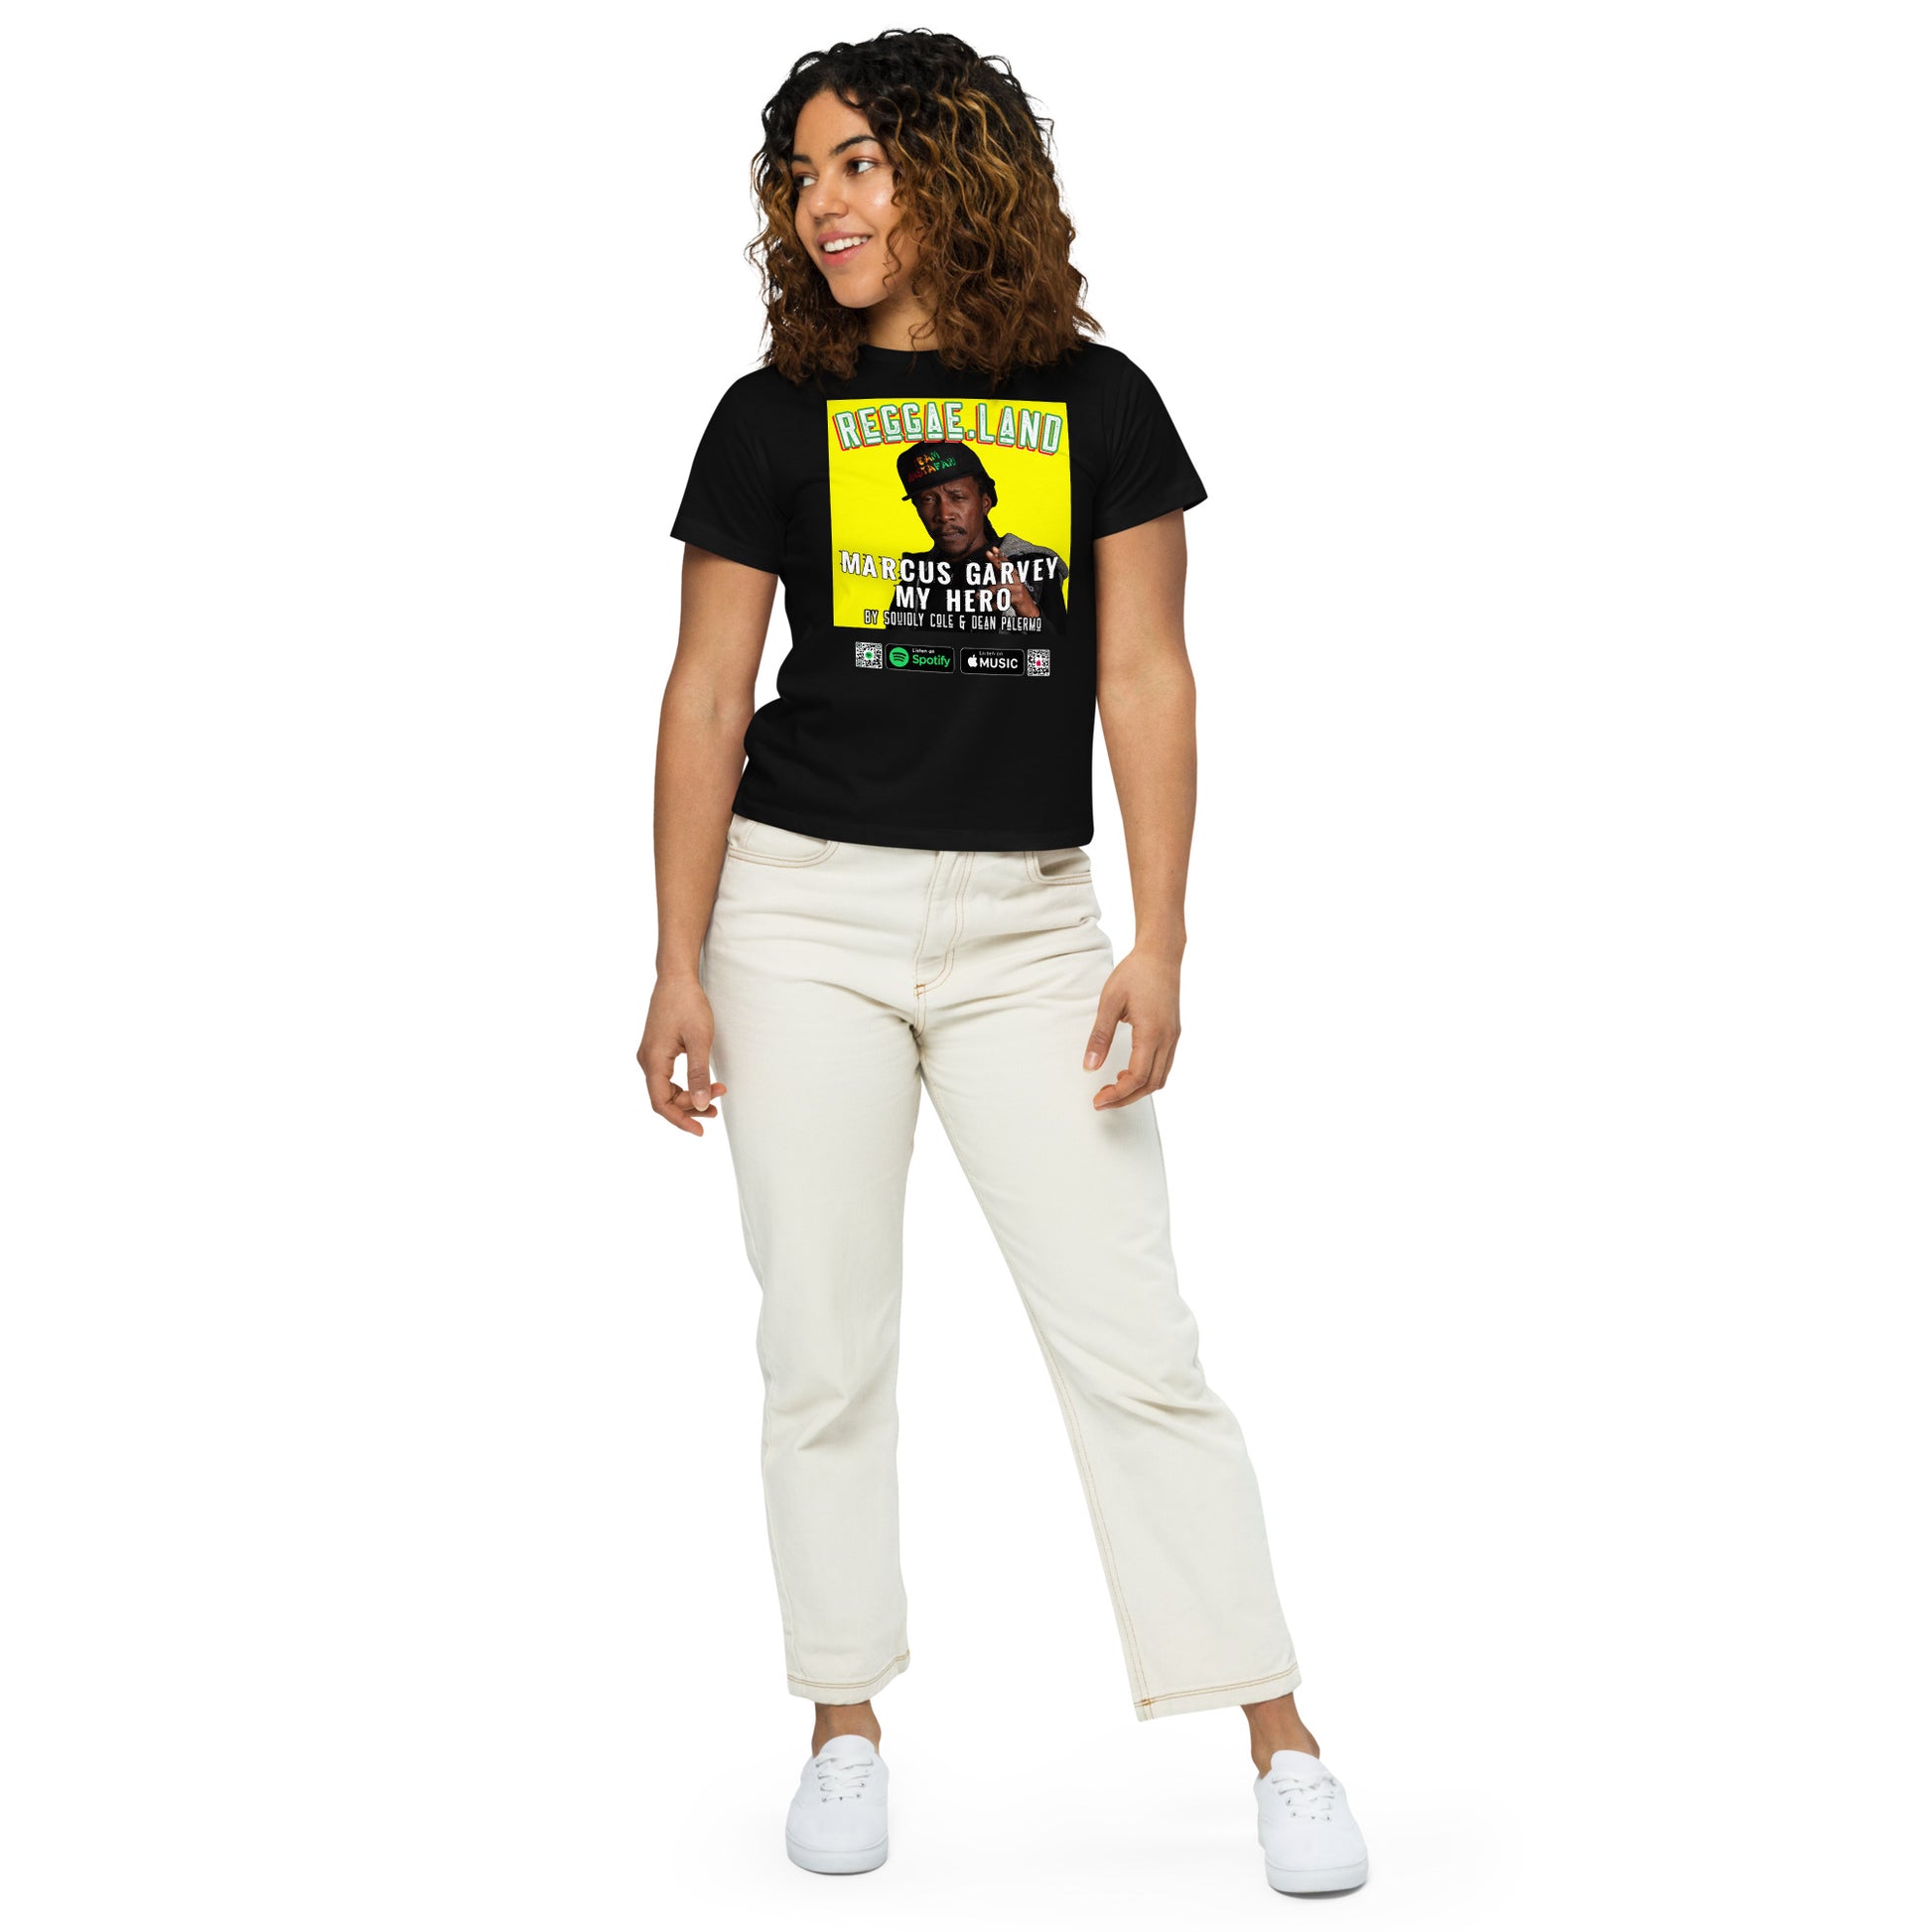 Empower with Garvey: Reggae.Land Women's High-Waisted T-Shirt - Artwork #010. Elevate your style, exclusively at Stashbox.ai.